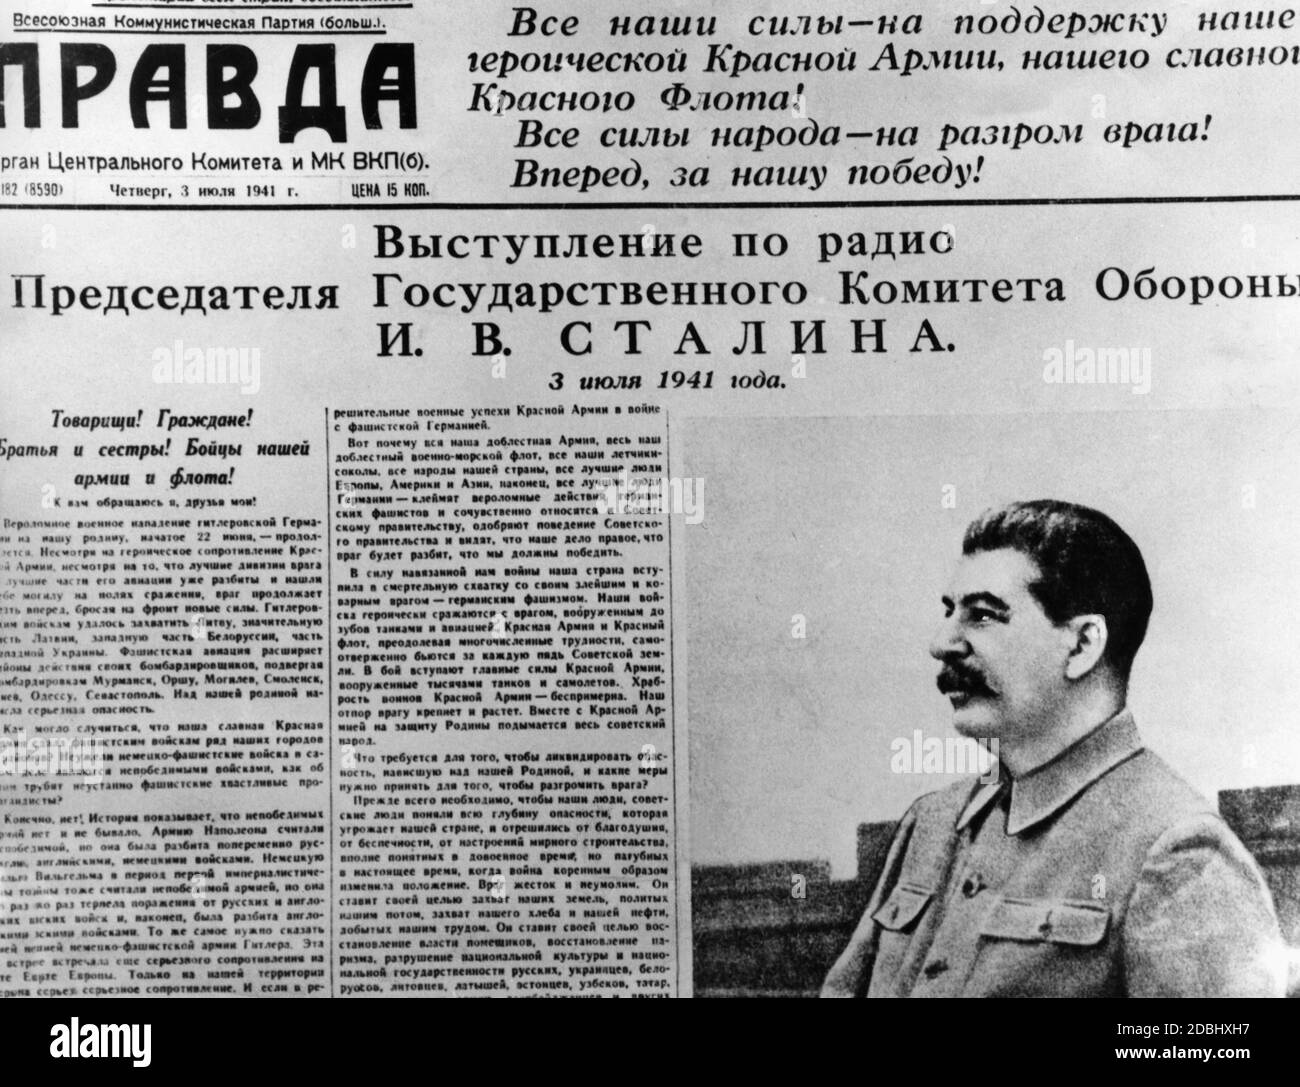 'Stalin on the front page of an issue of the Pravda, the party newspaper of the CPSU, in 1941. After the National Socialist Germany started the German-Soviet war with Operation Barbarossa, Stalin calls on the Soviet people to resist in a printed speech: ''All our forces are in support of our heroic Red Army, our glorious Red Navy! All the strength of the people to defeat the enemy! Forward, for our victory!'' Stalin also points out that Napoleon himself failed in his attempt to conquer Russia. ' Stock Photo